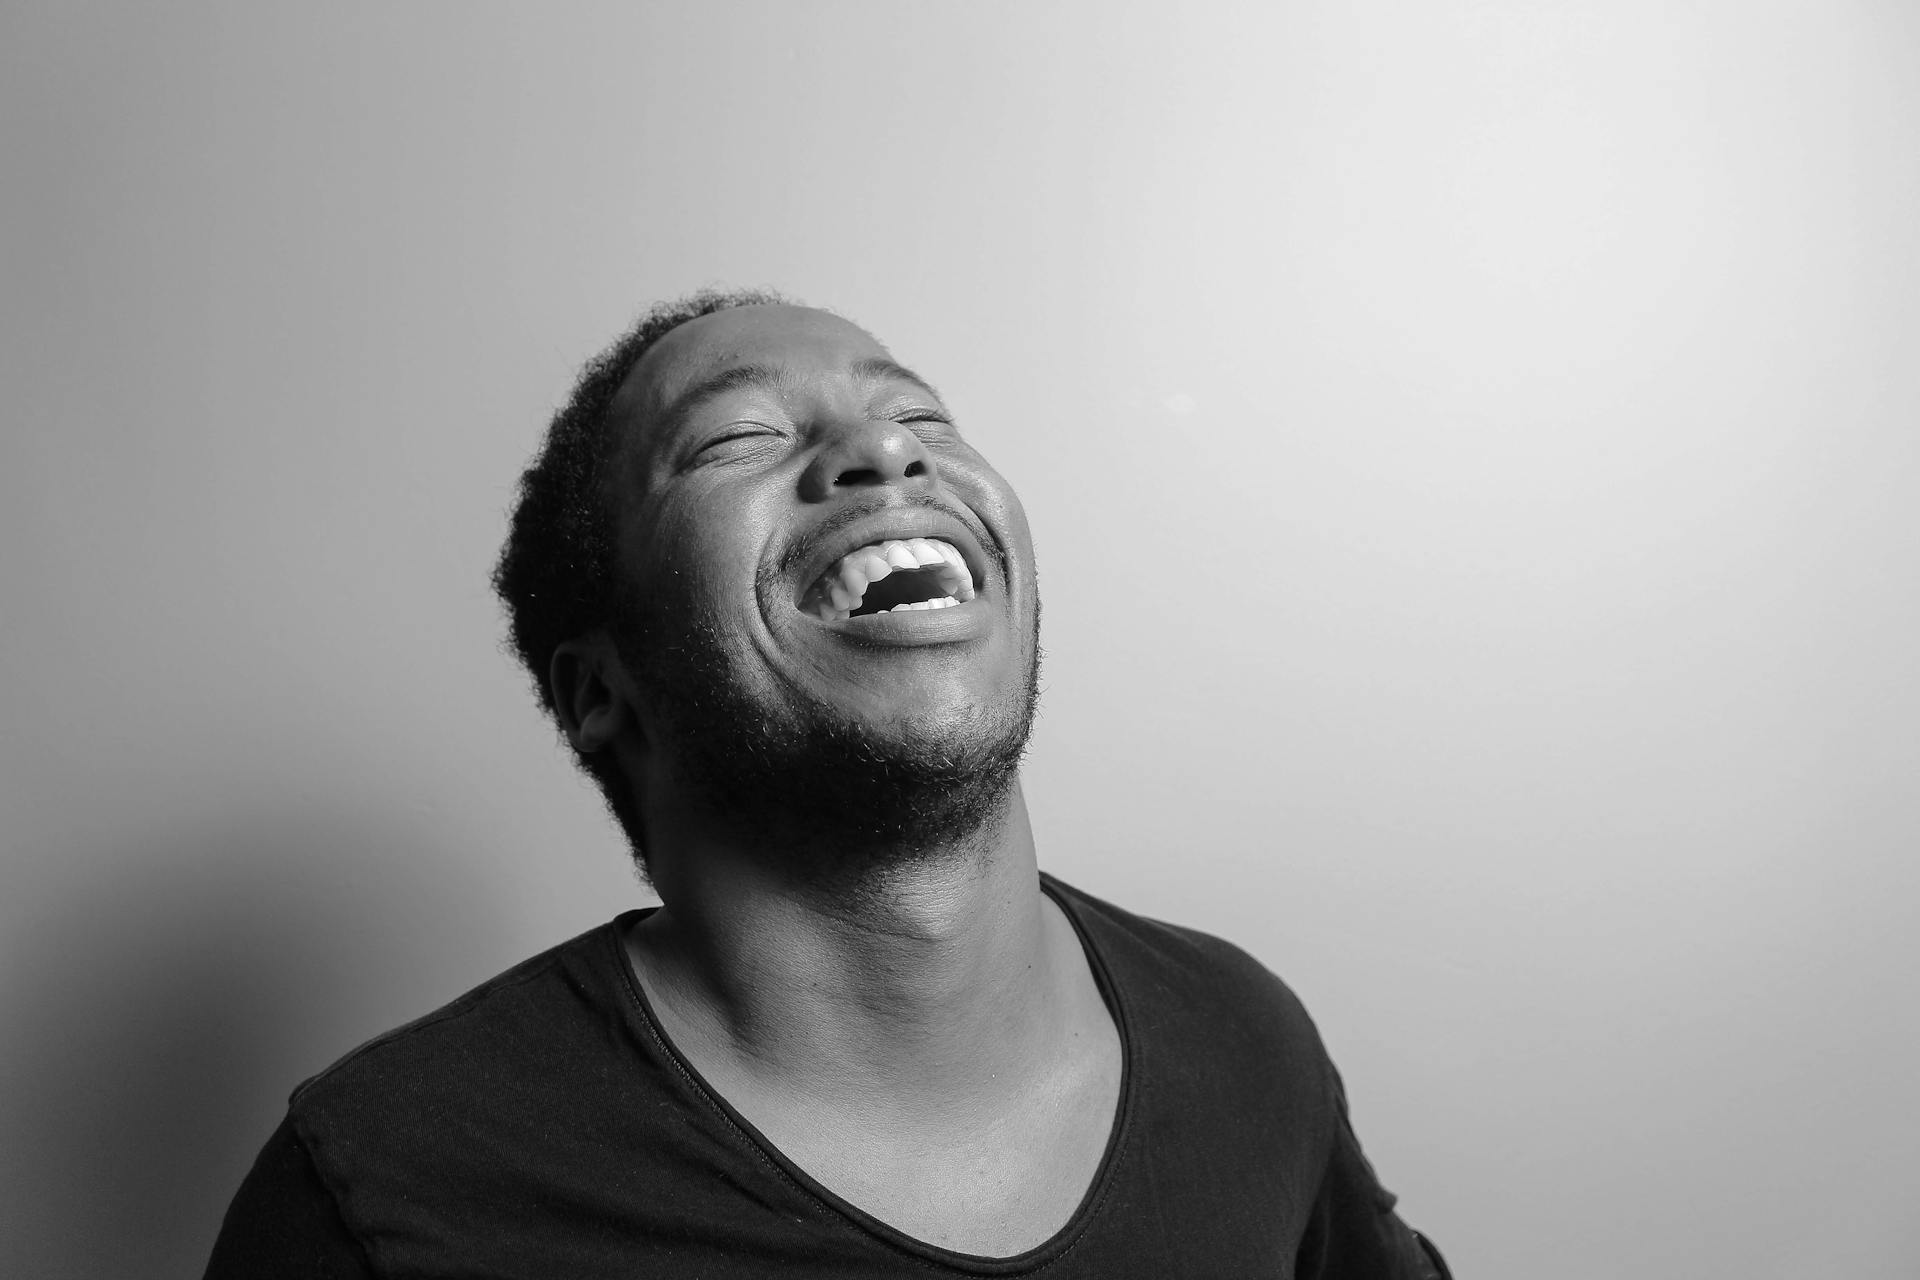 A man laughing, with his head tossed back | Source: Pexels